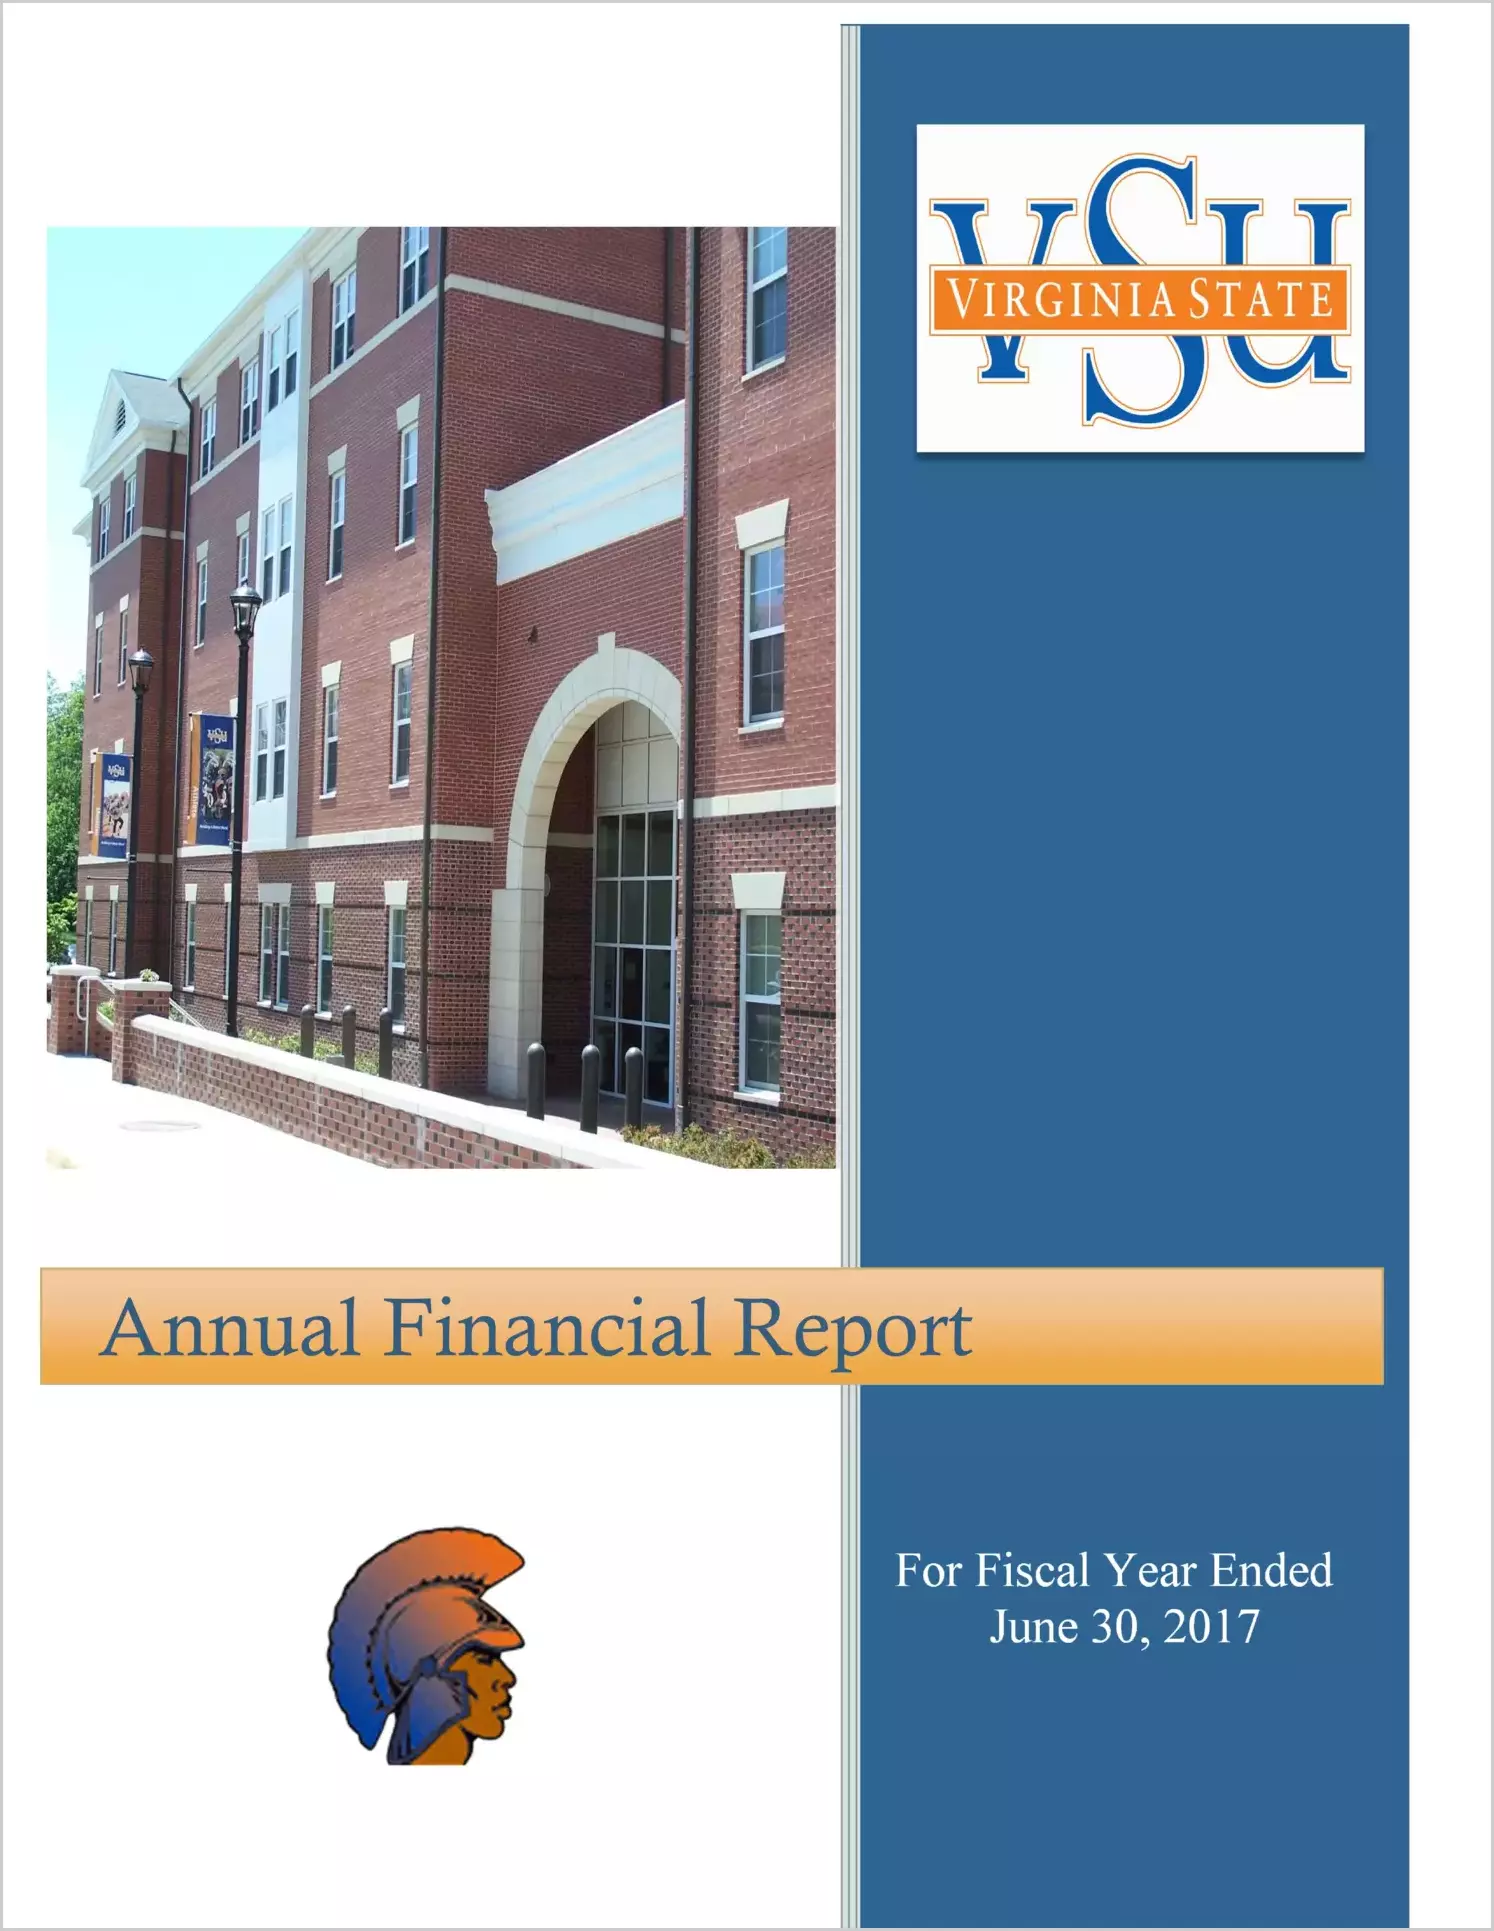 Virginia State University Financial Statements for the year ended June 30, 2017